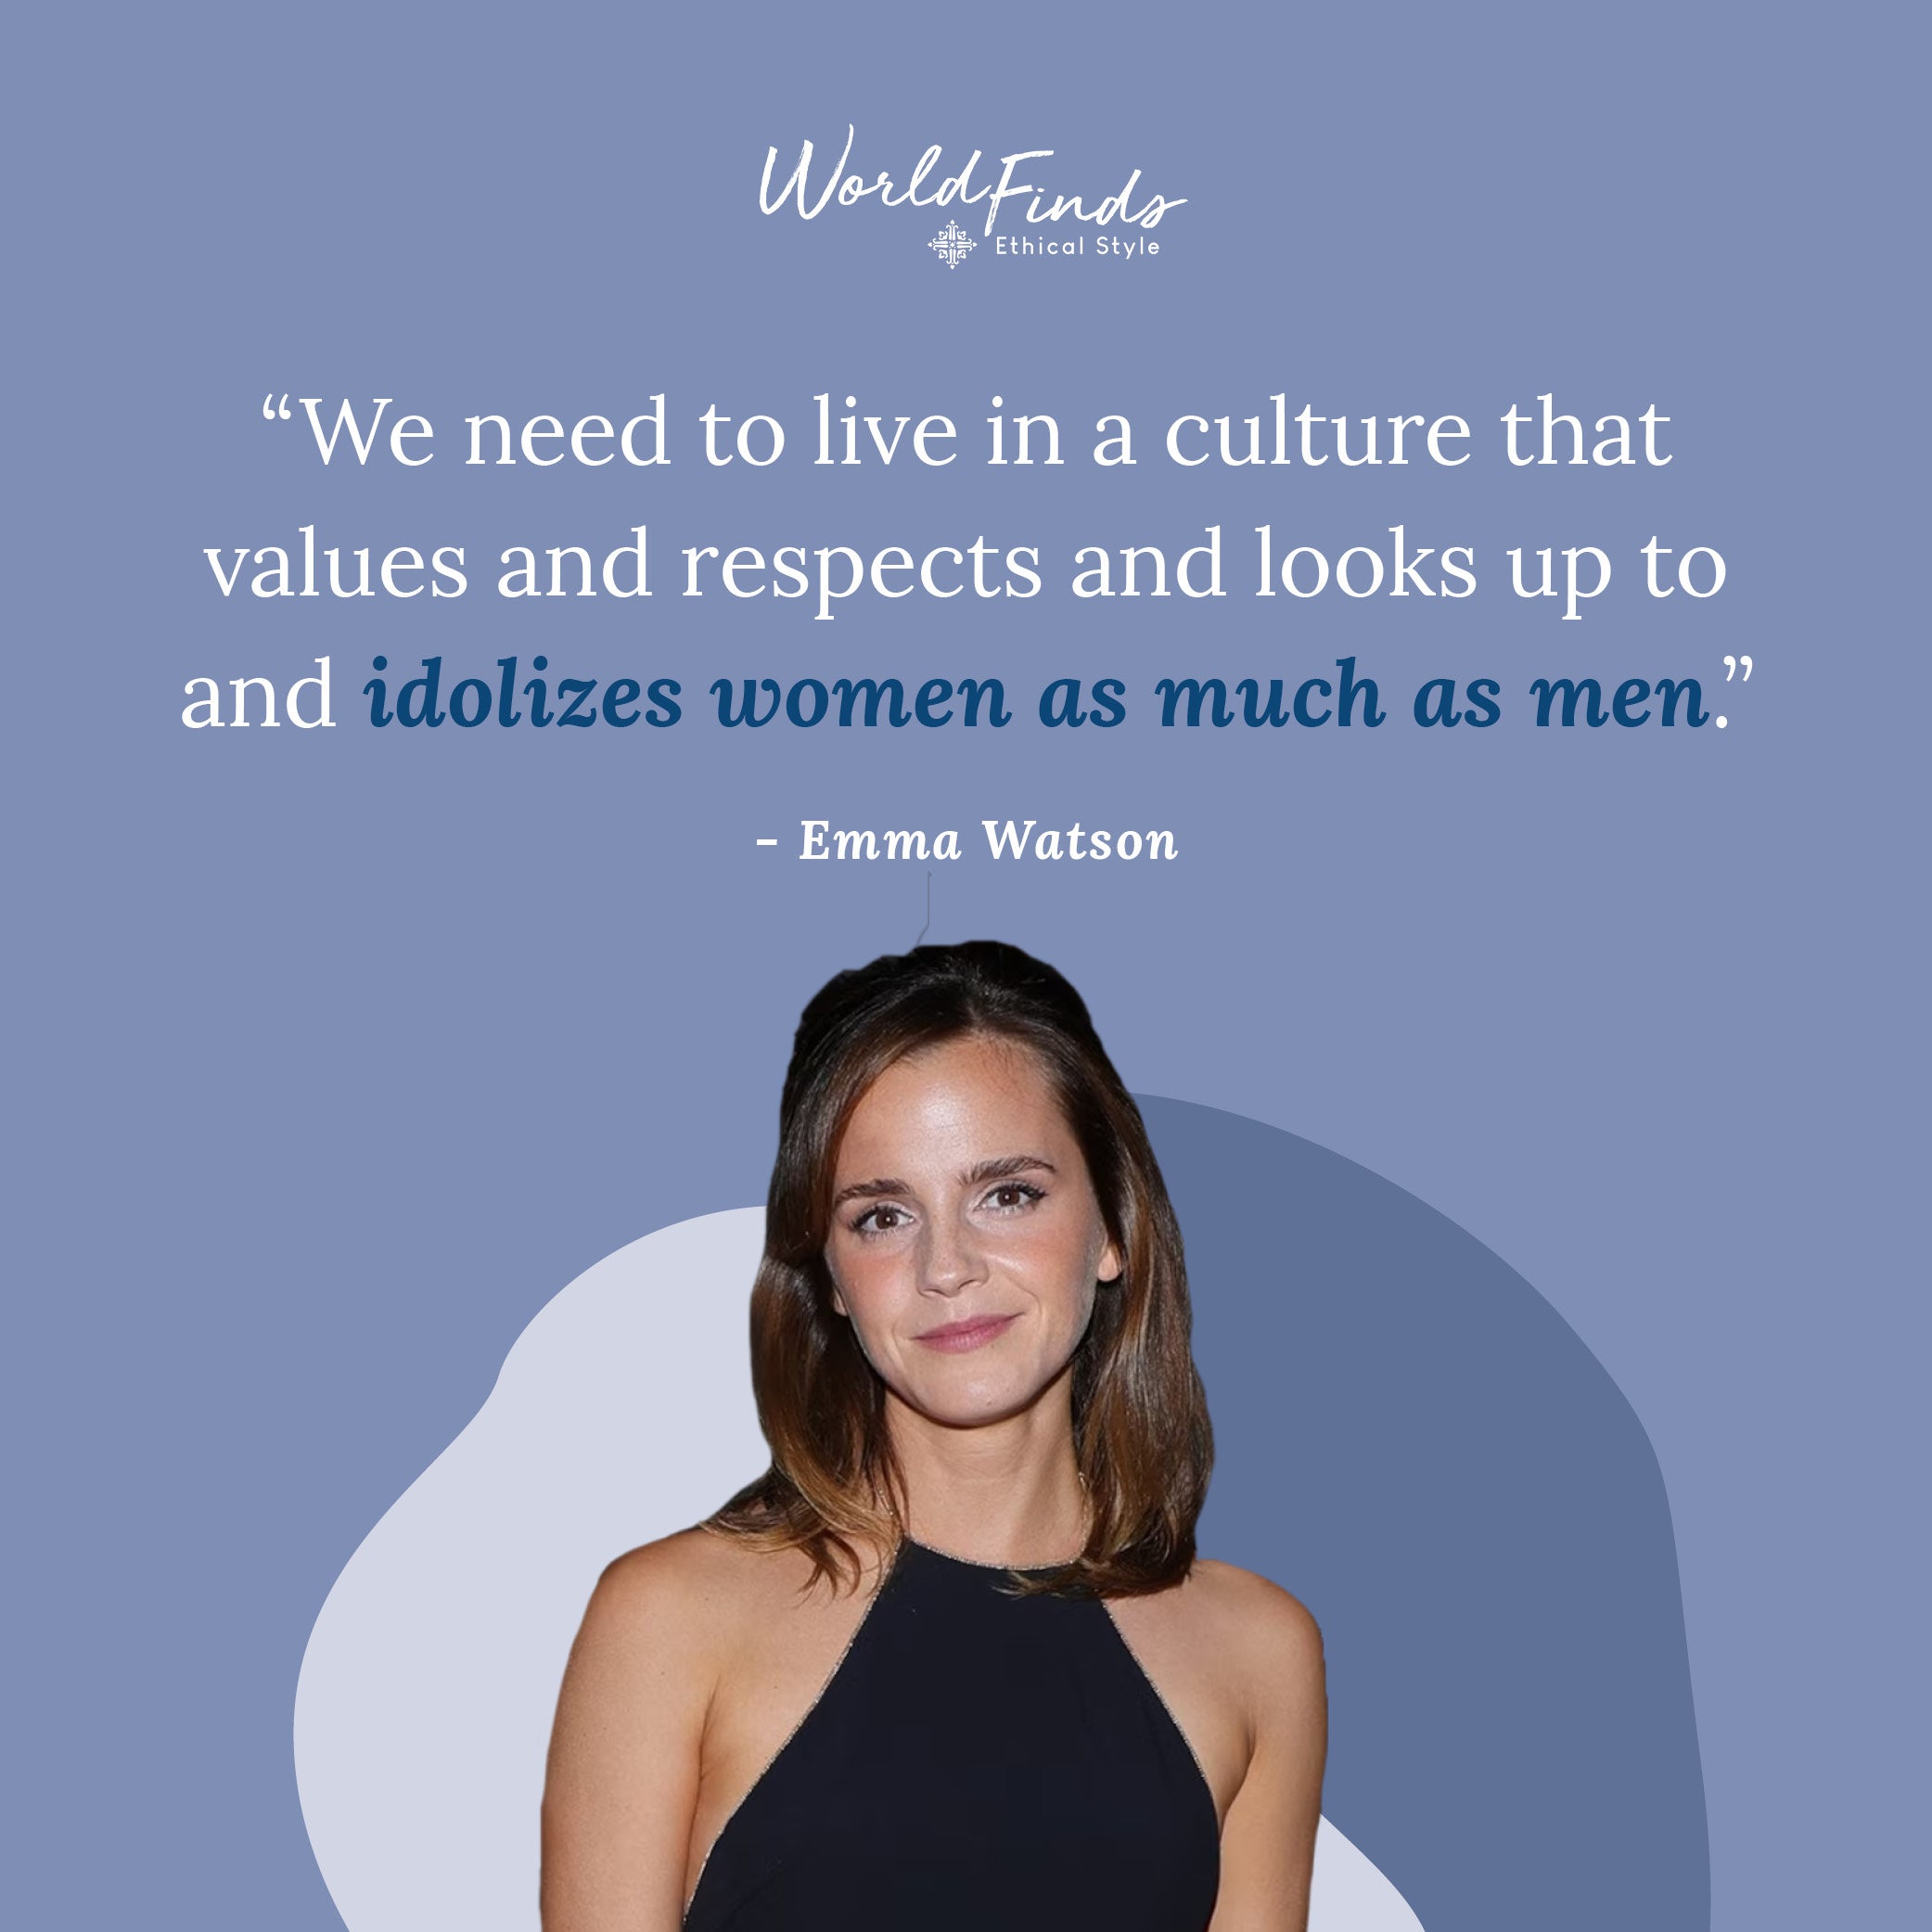 Quote from Emma Watson, "We need to live in a culture that values and respects and looks up to and idolizes women as much as men."